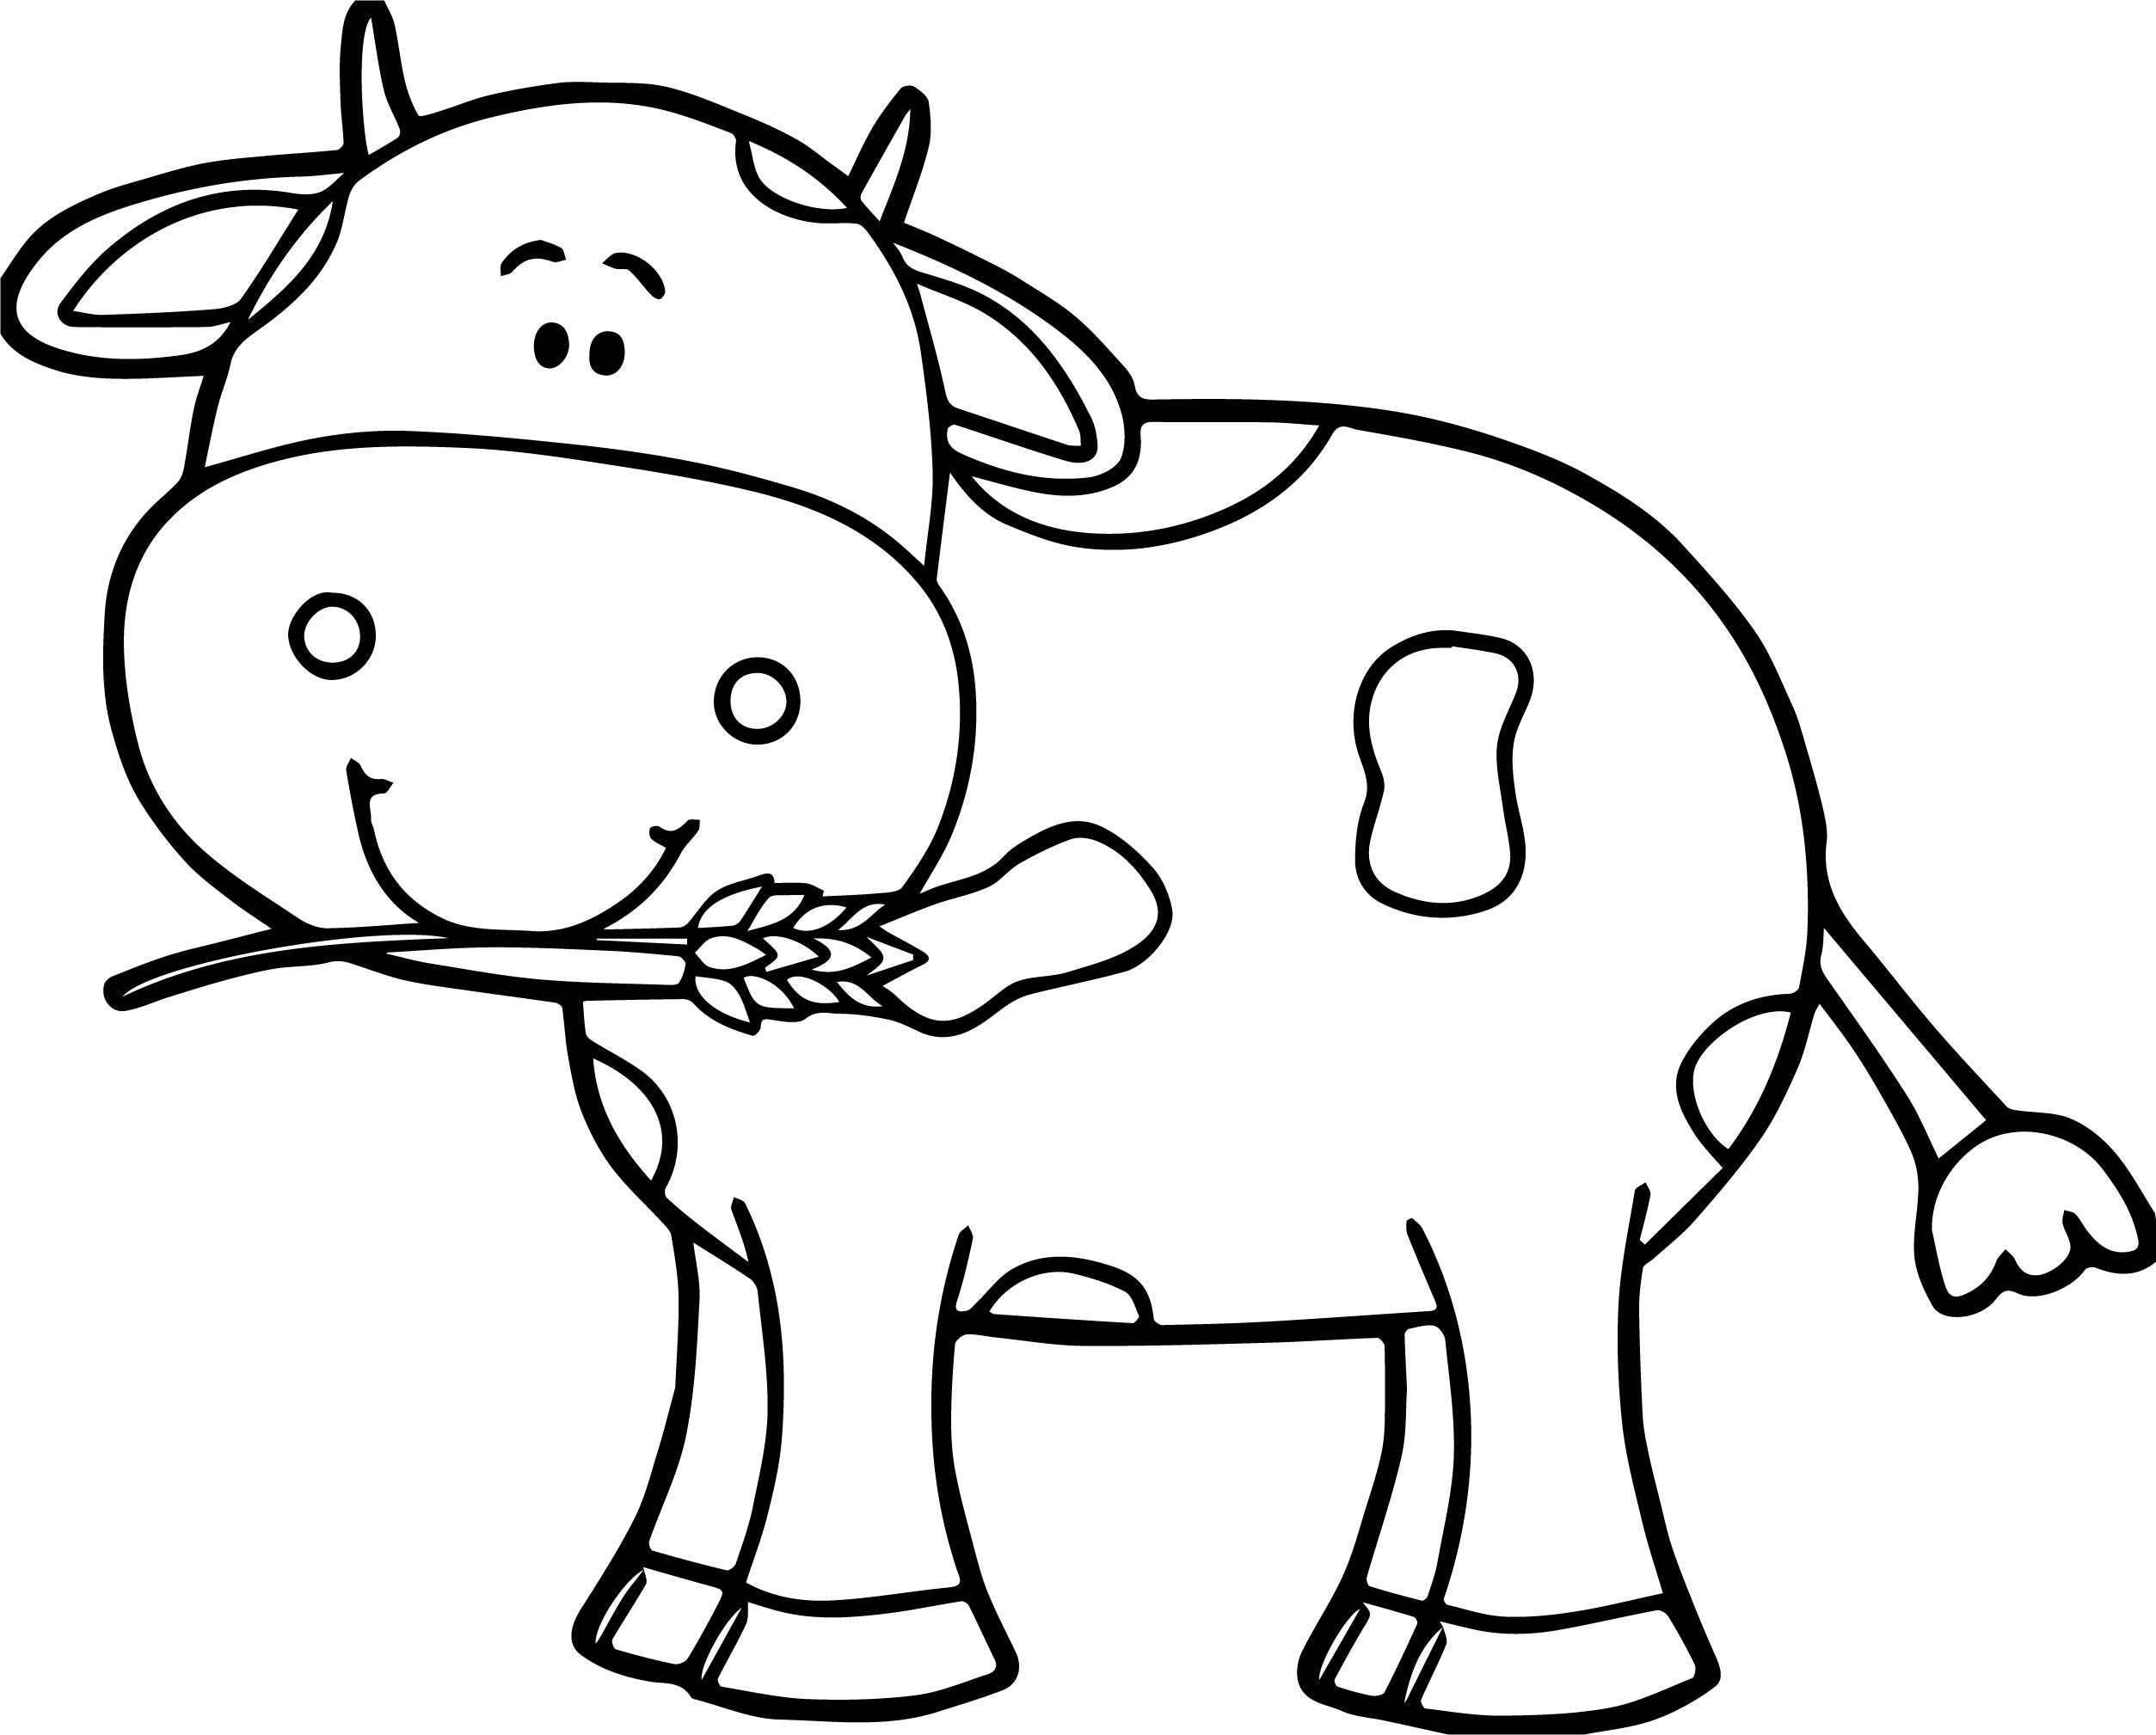 Cow Head Coloring Page at Free printable colorings